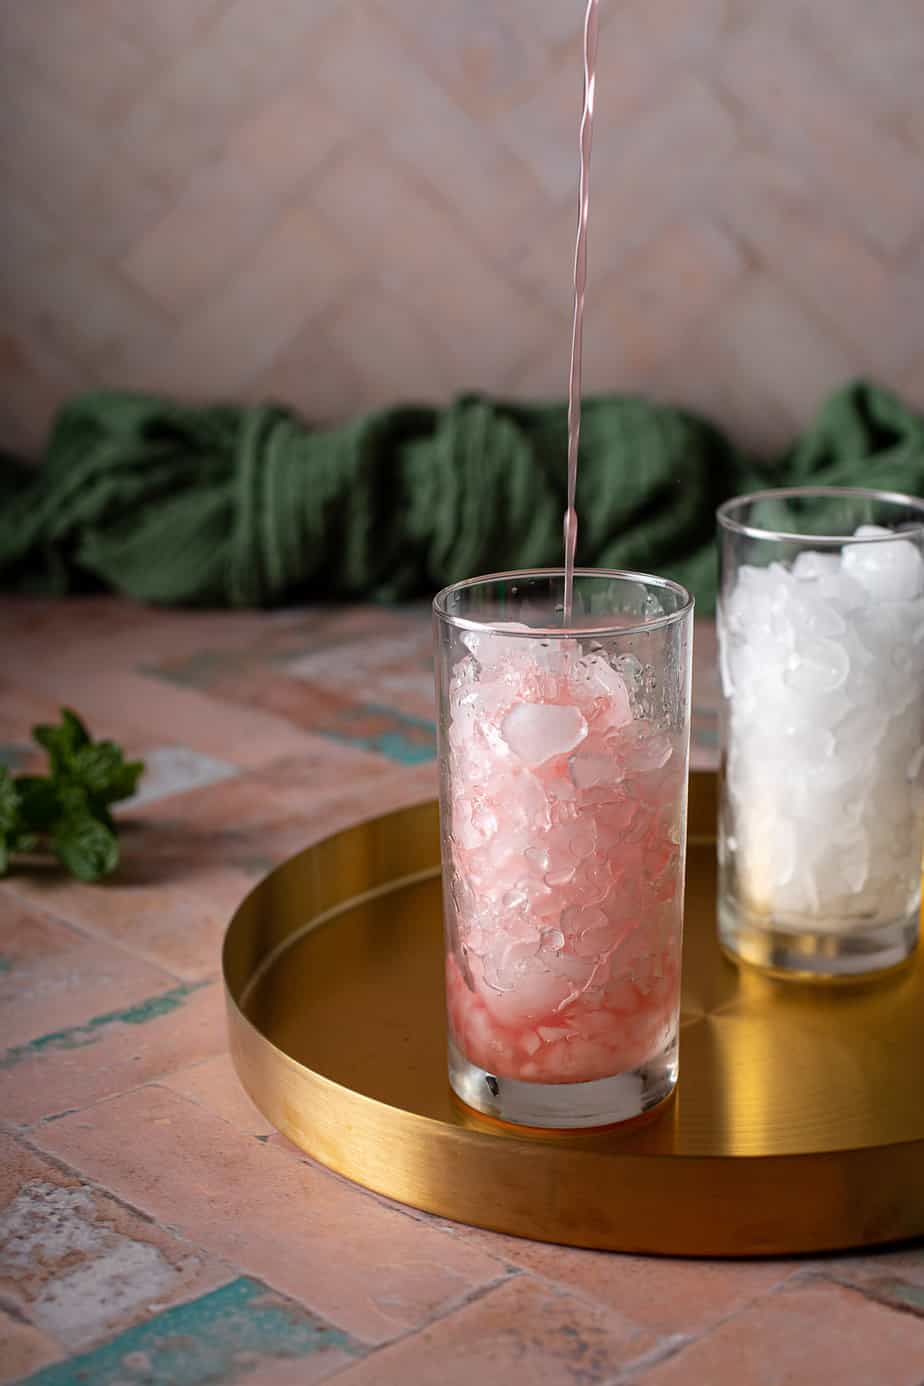 watermelon juice being poured into a tall glass filled with crushed ice